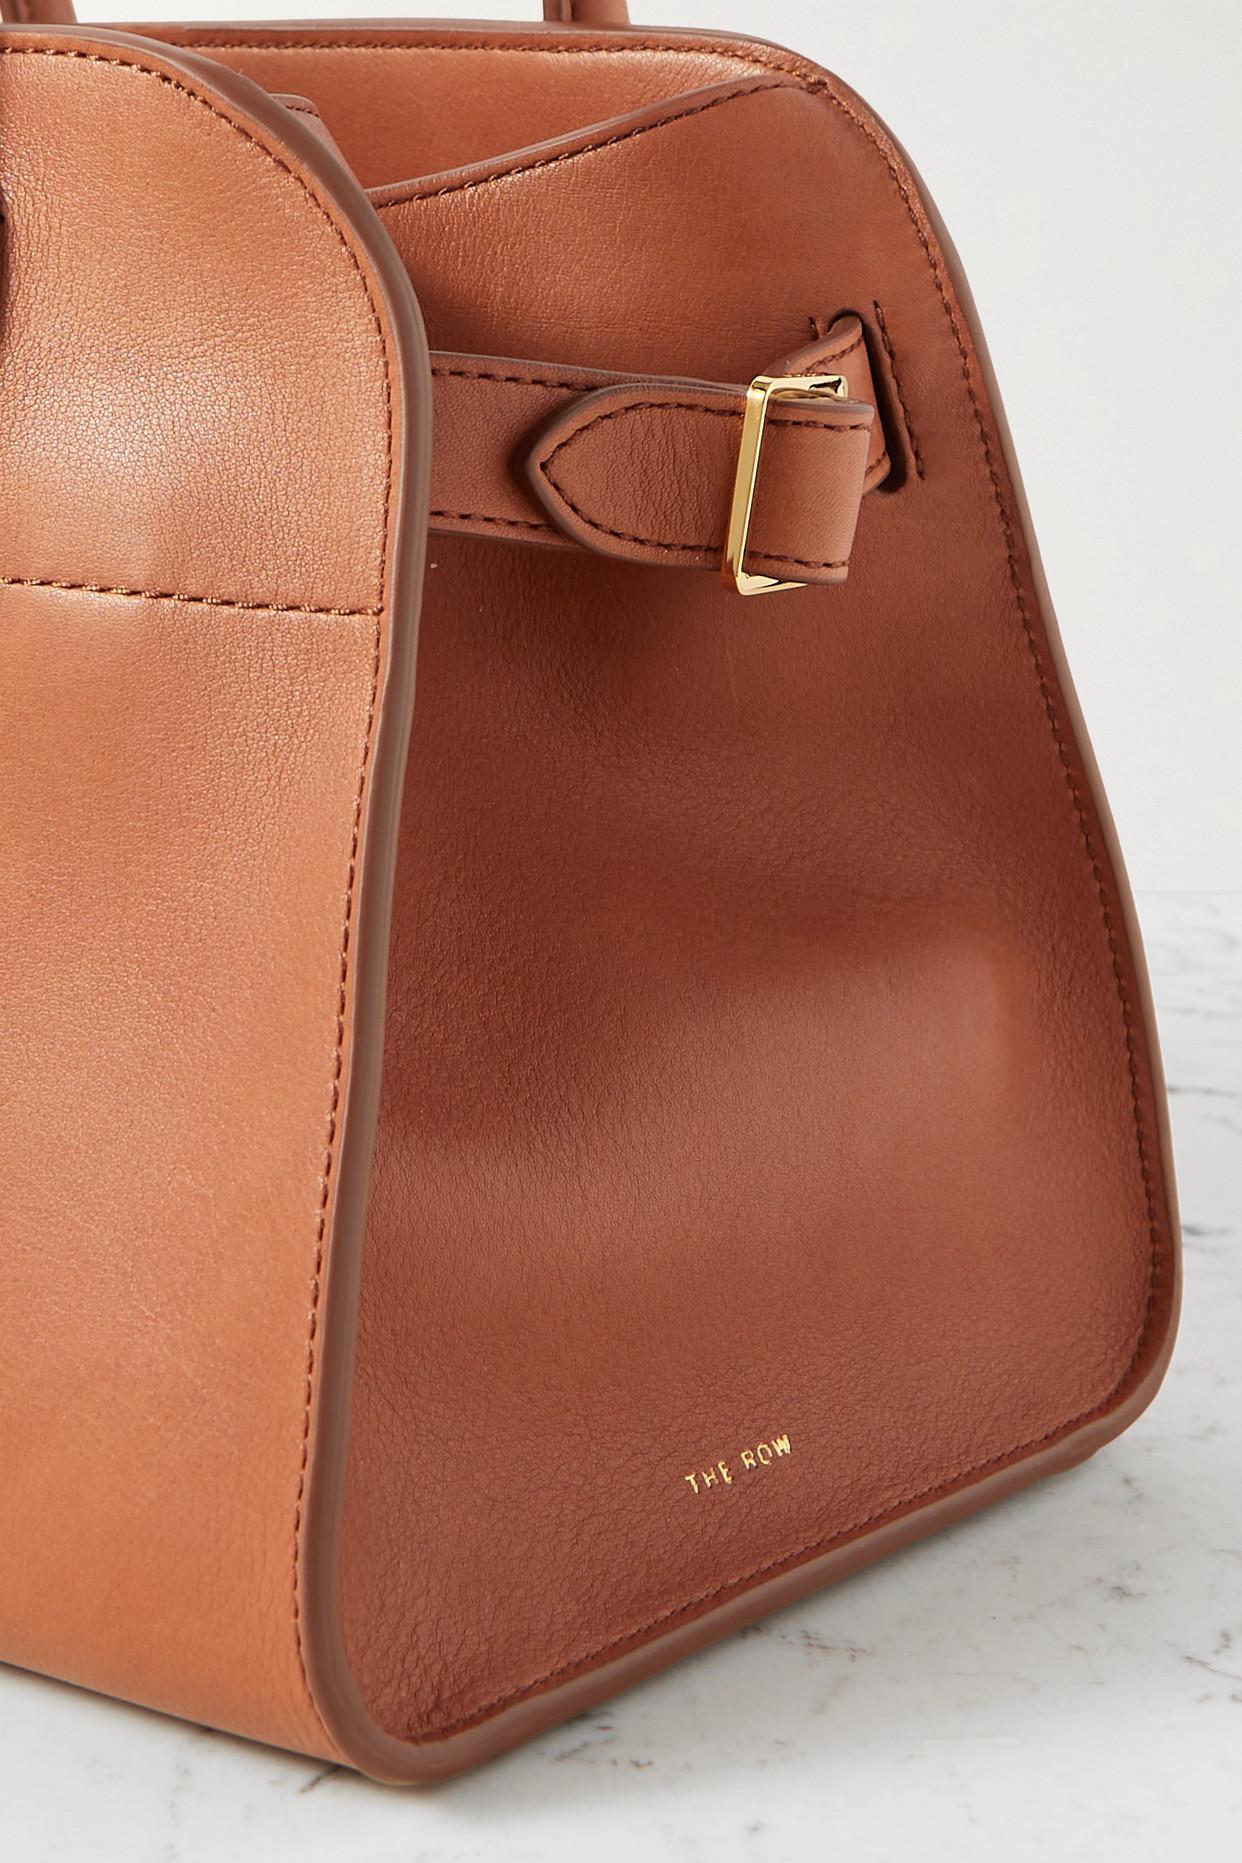 The Row Margaux 17 Buckled Suede Tote | Designer Bags | RADPRESENT